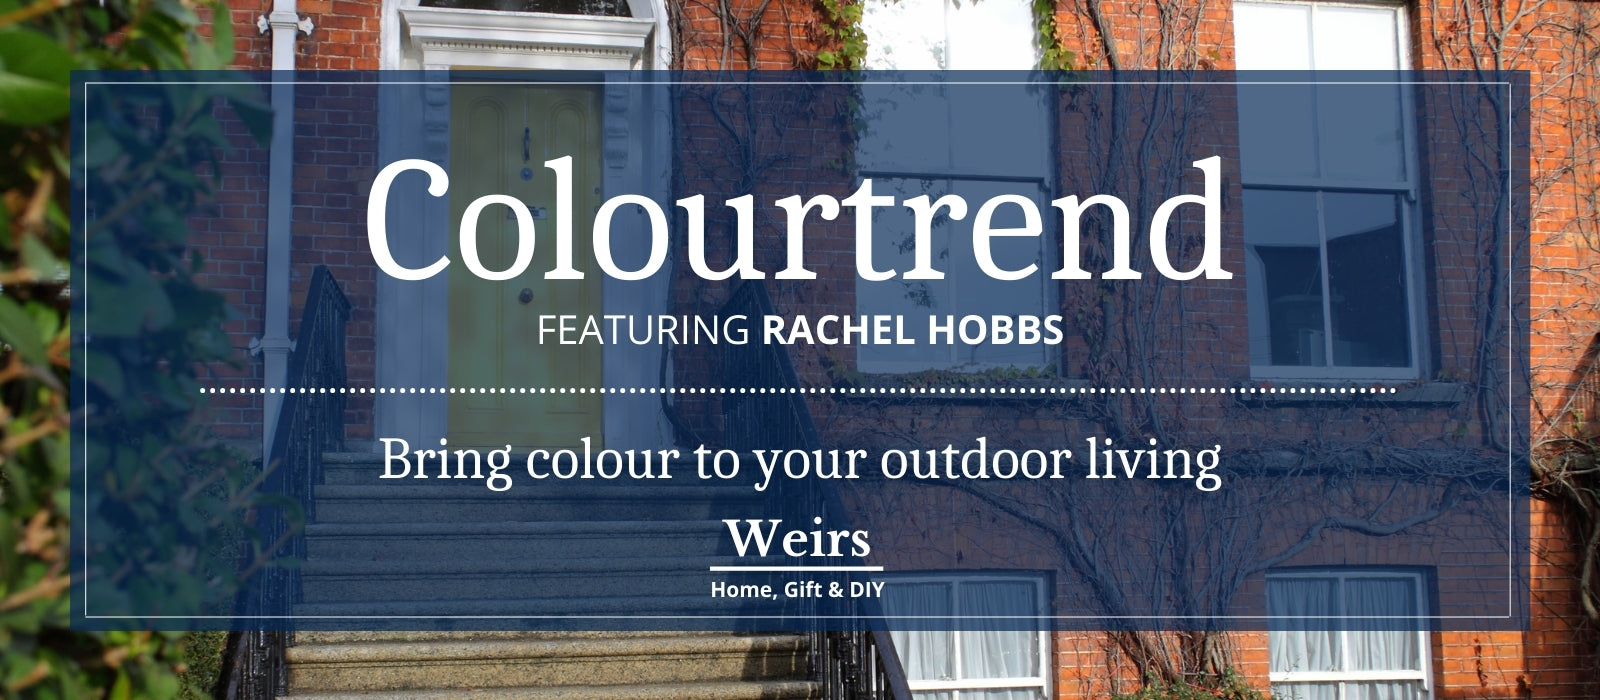 Colourtrend: Bring Colour to your Outdoor Living Blog | Weirs of Baggot St | Shop Online